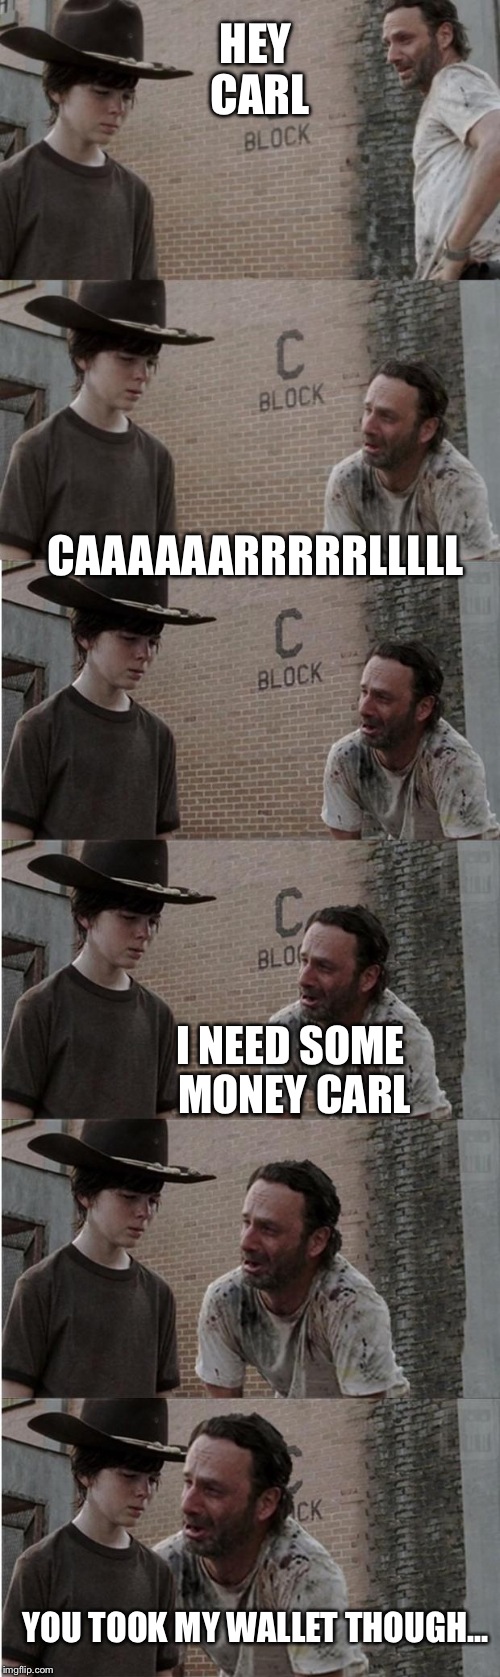 Rick and Carl Longer | HEY CARL; CAAAAAARRRRRLLLLL; I NEED SOME MONEY CARL; YOU TOOK MY WALLET THOUGH... | image tagged in memes,rick and carl longer | made w/ Imgflip meme maker